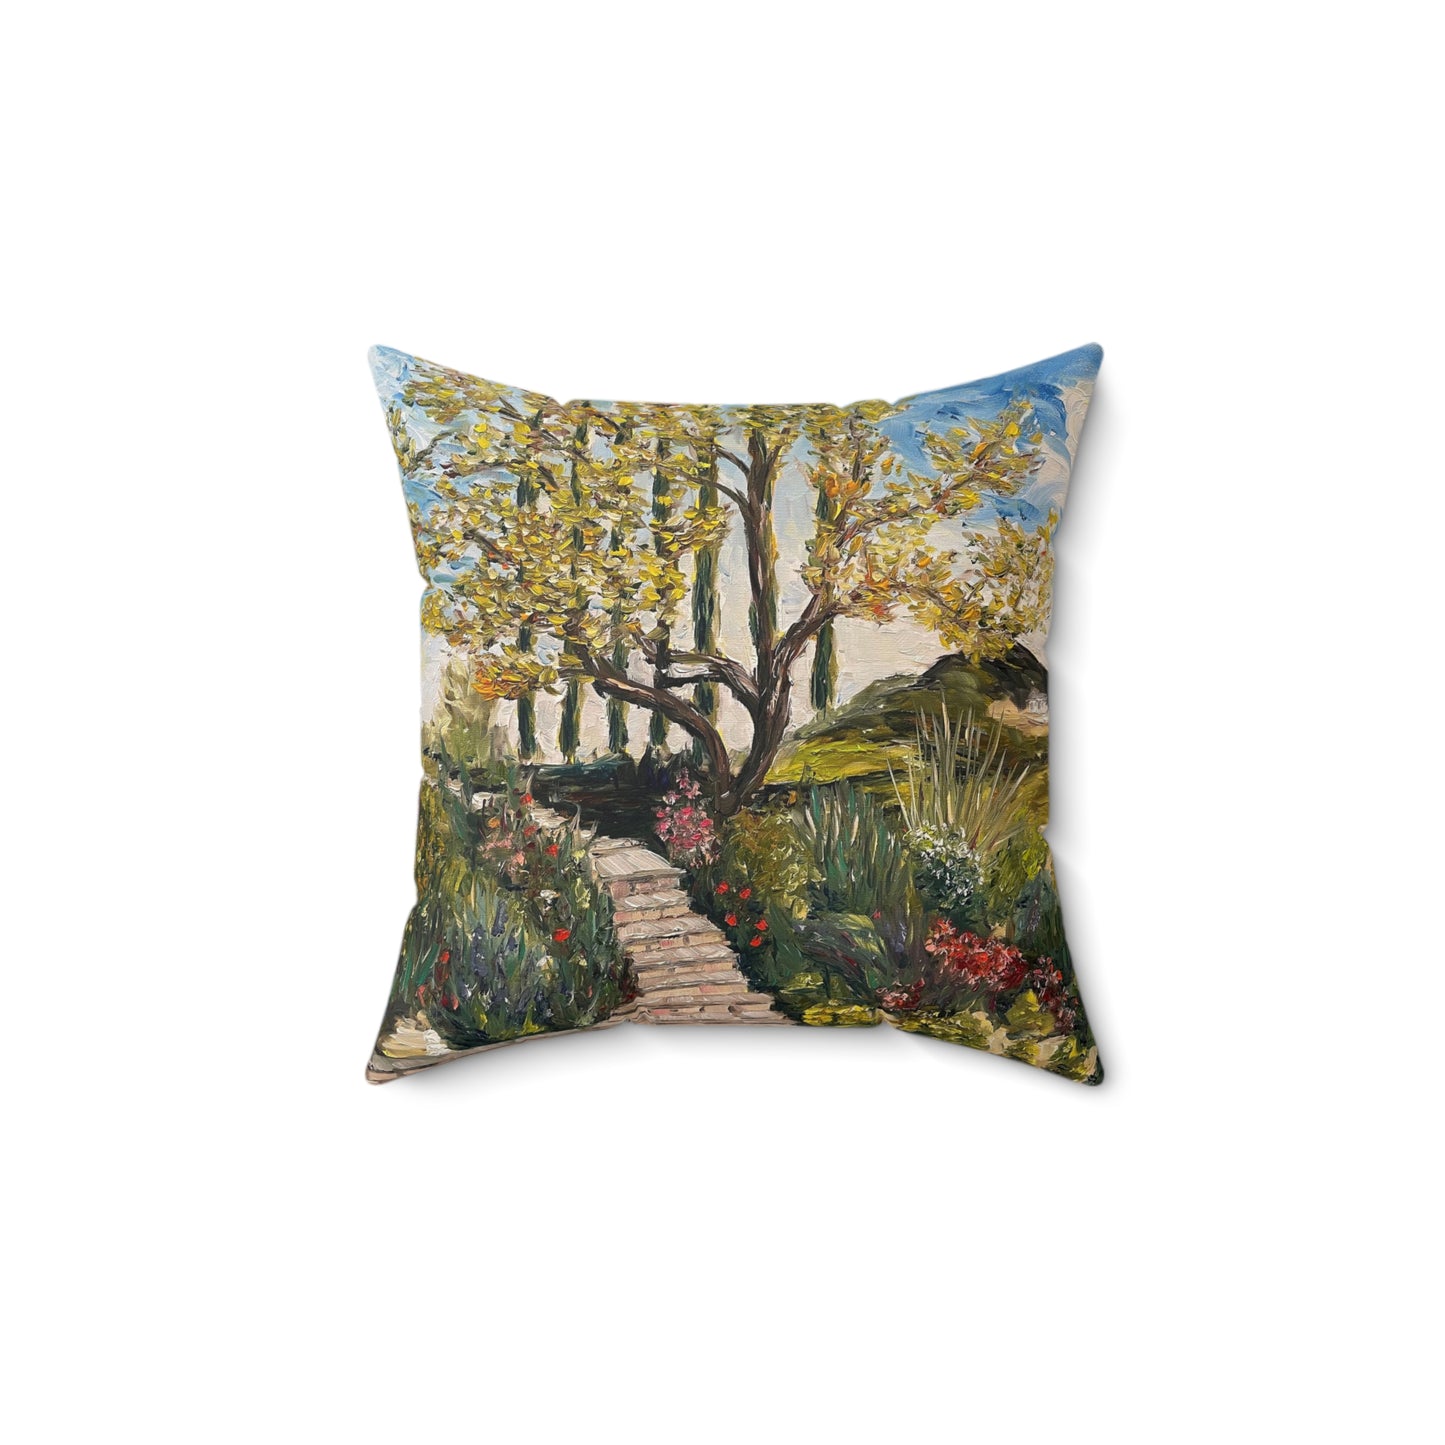 Tree and Garden at GBV Indoor Spun Polyester Square Pillow